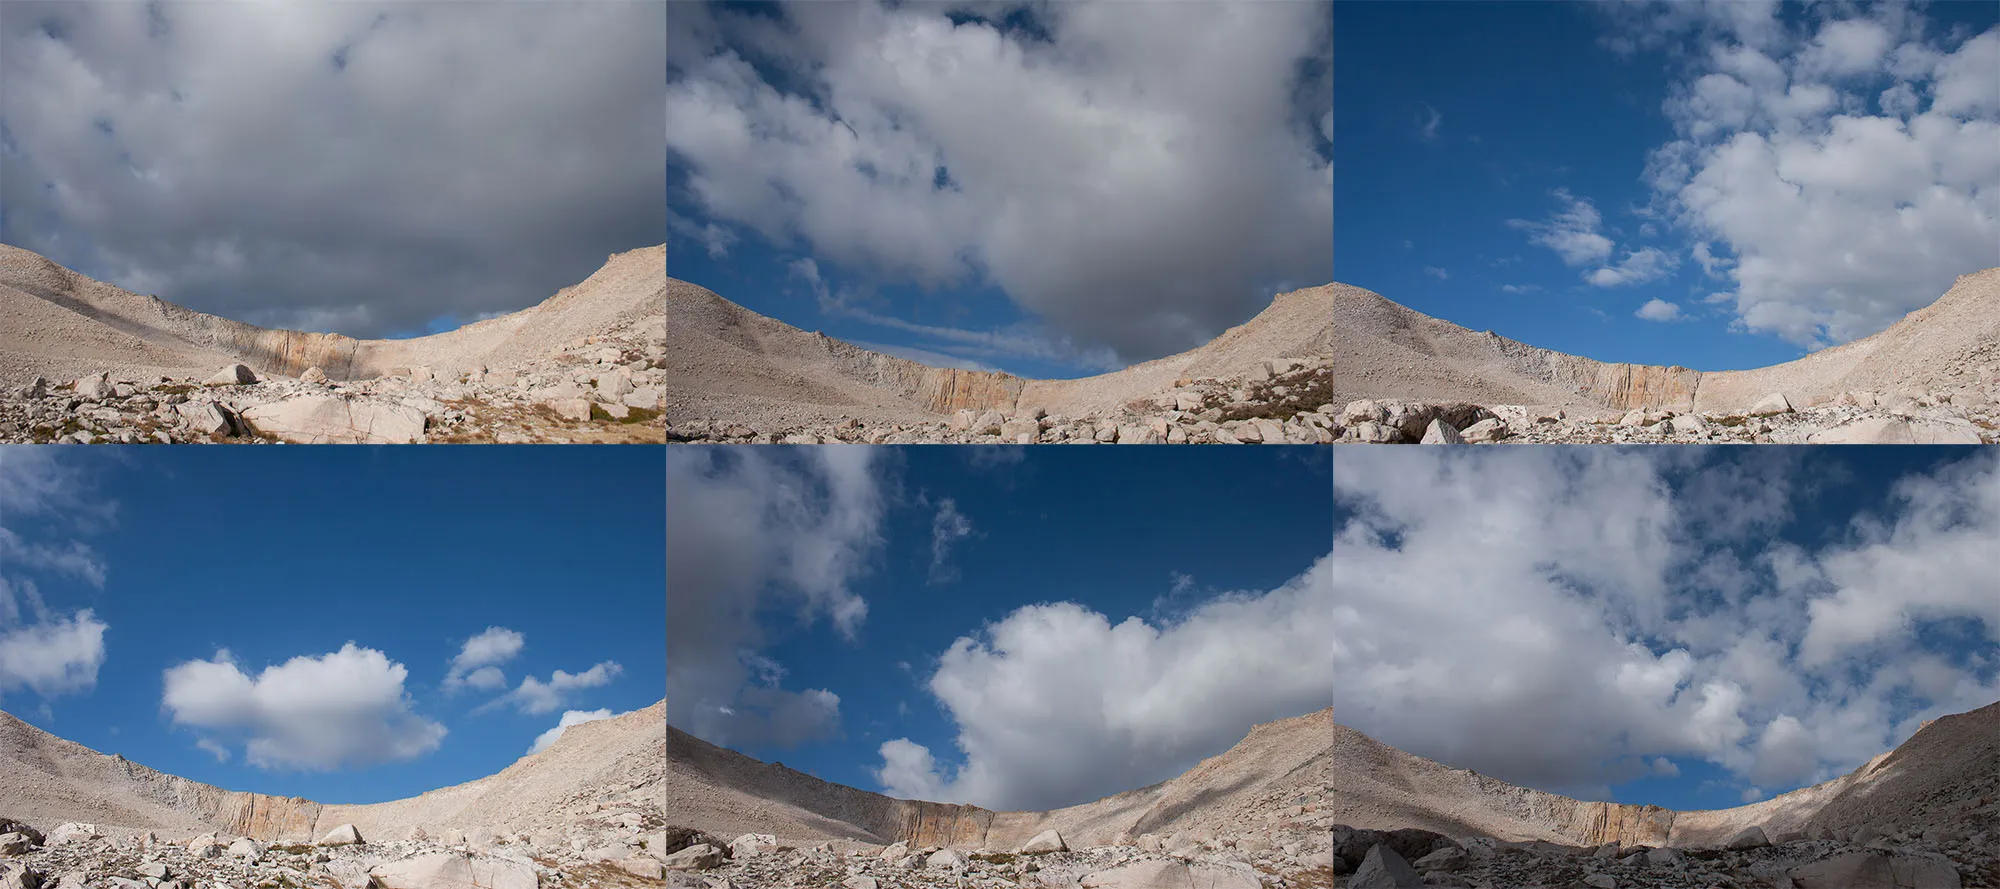 The same rock face between Cirque Peak and New Army Pass, pictures taken within half an hour